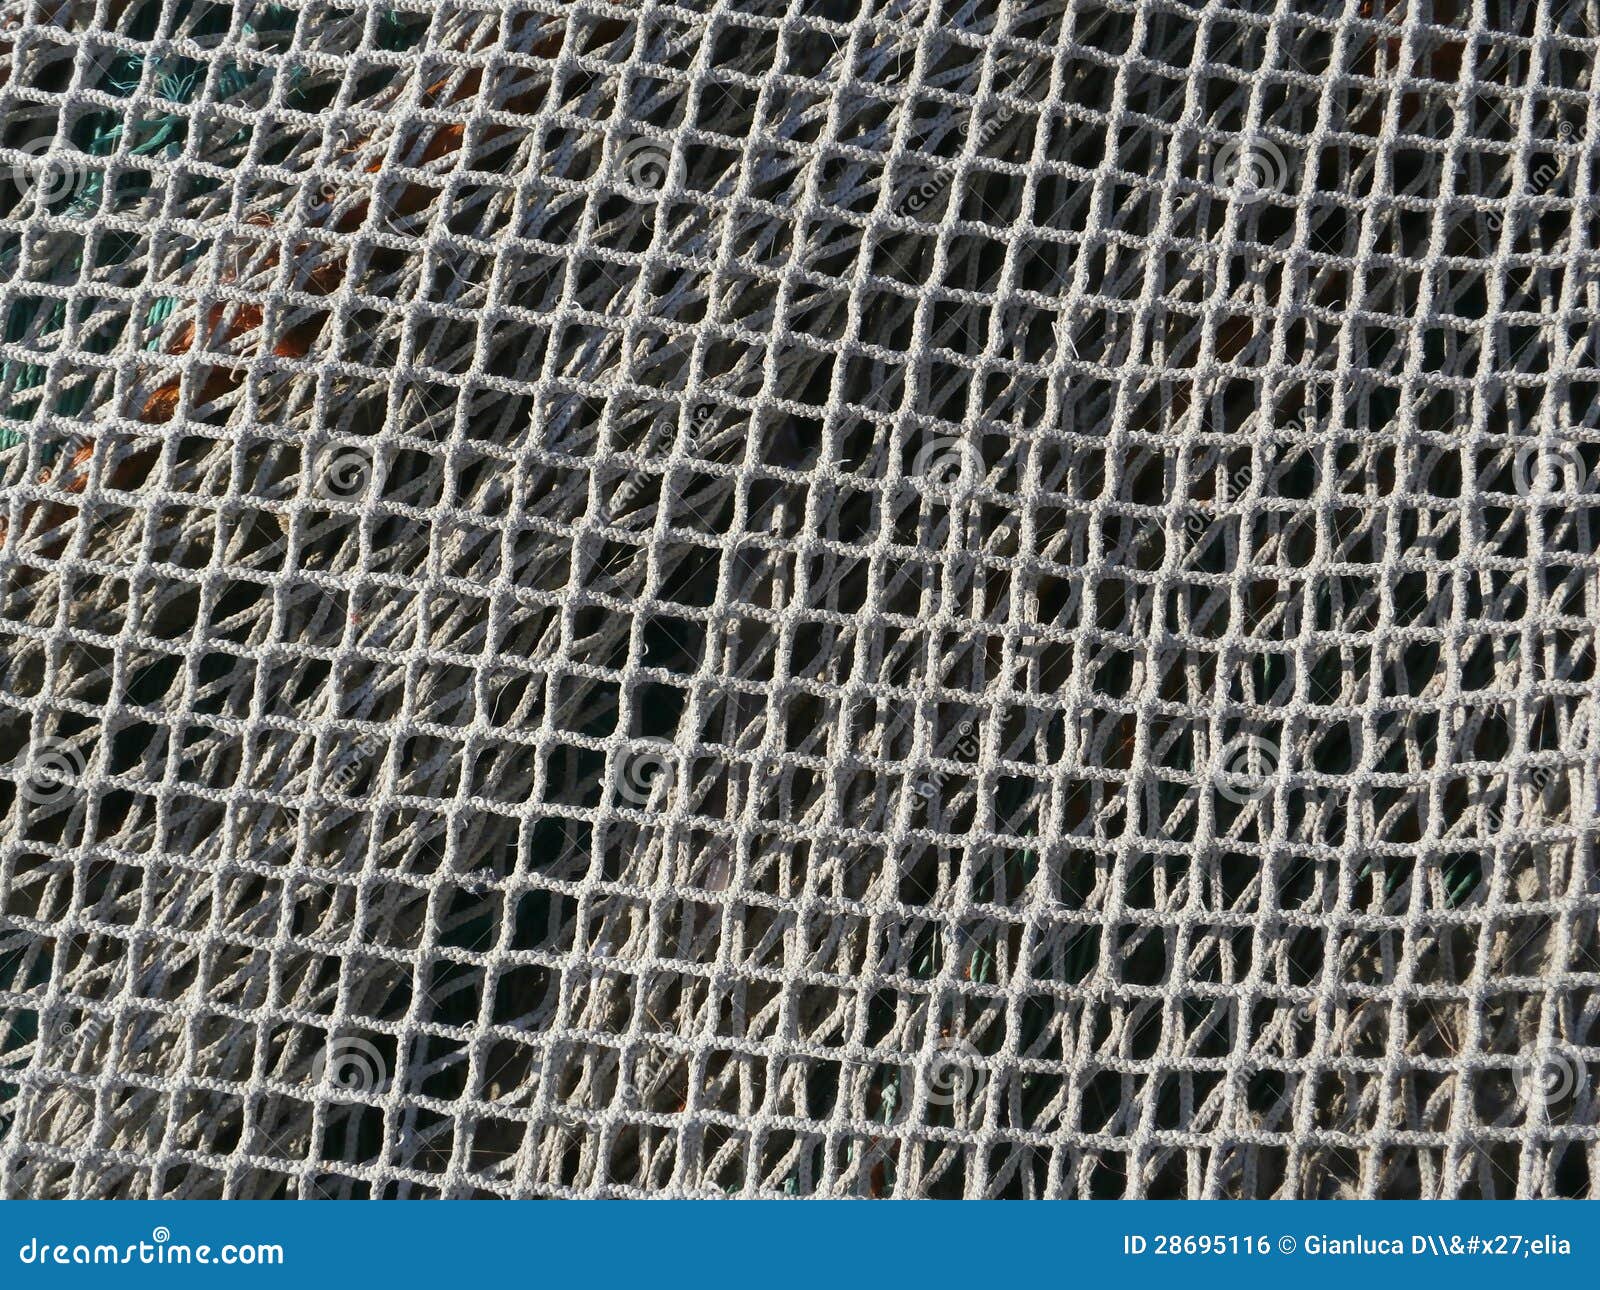 Fish net stock photo. Image of hole, outdoor, grid, textile - 28695116